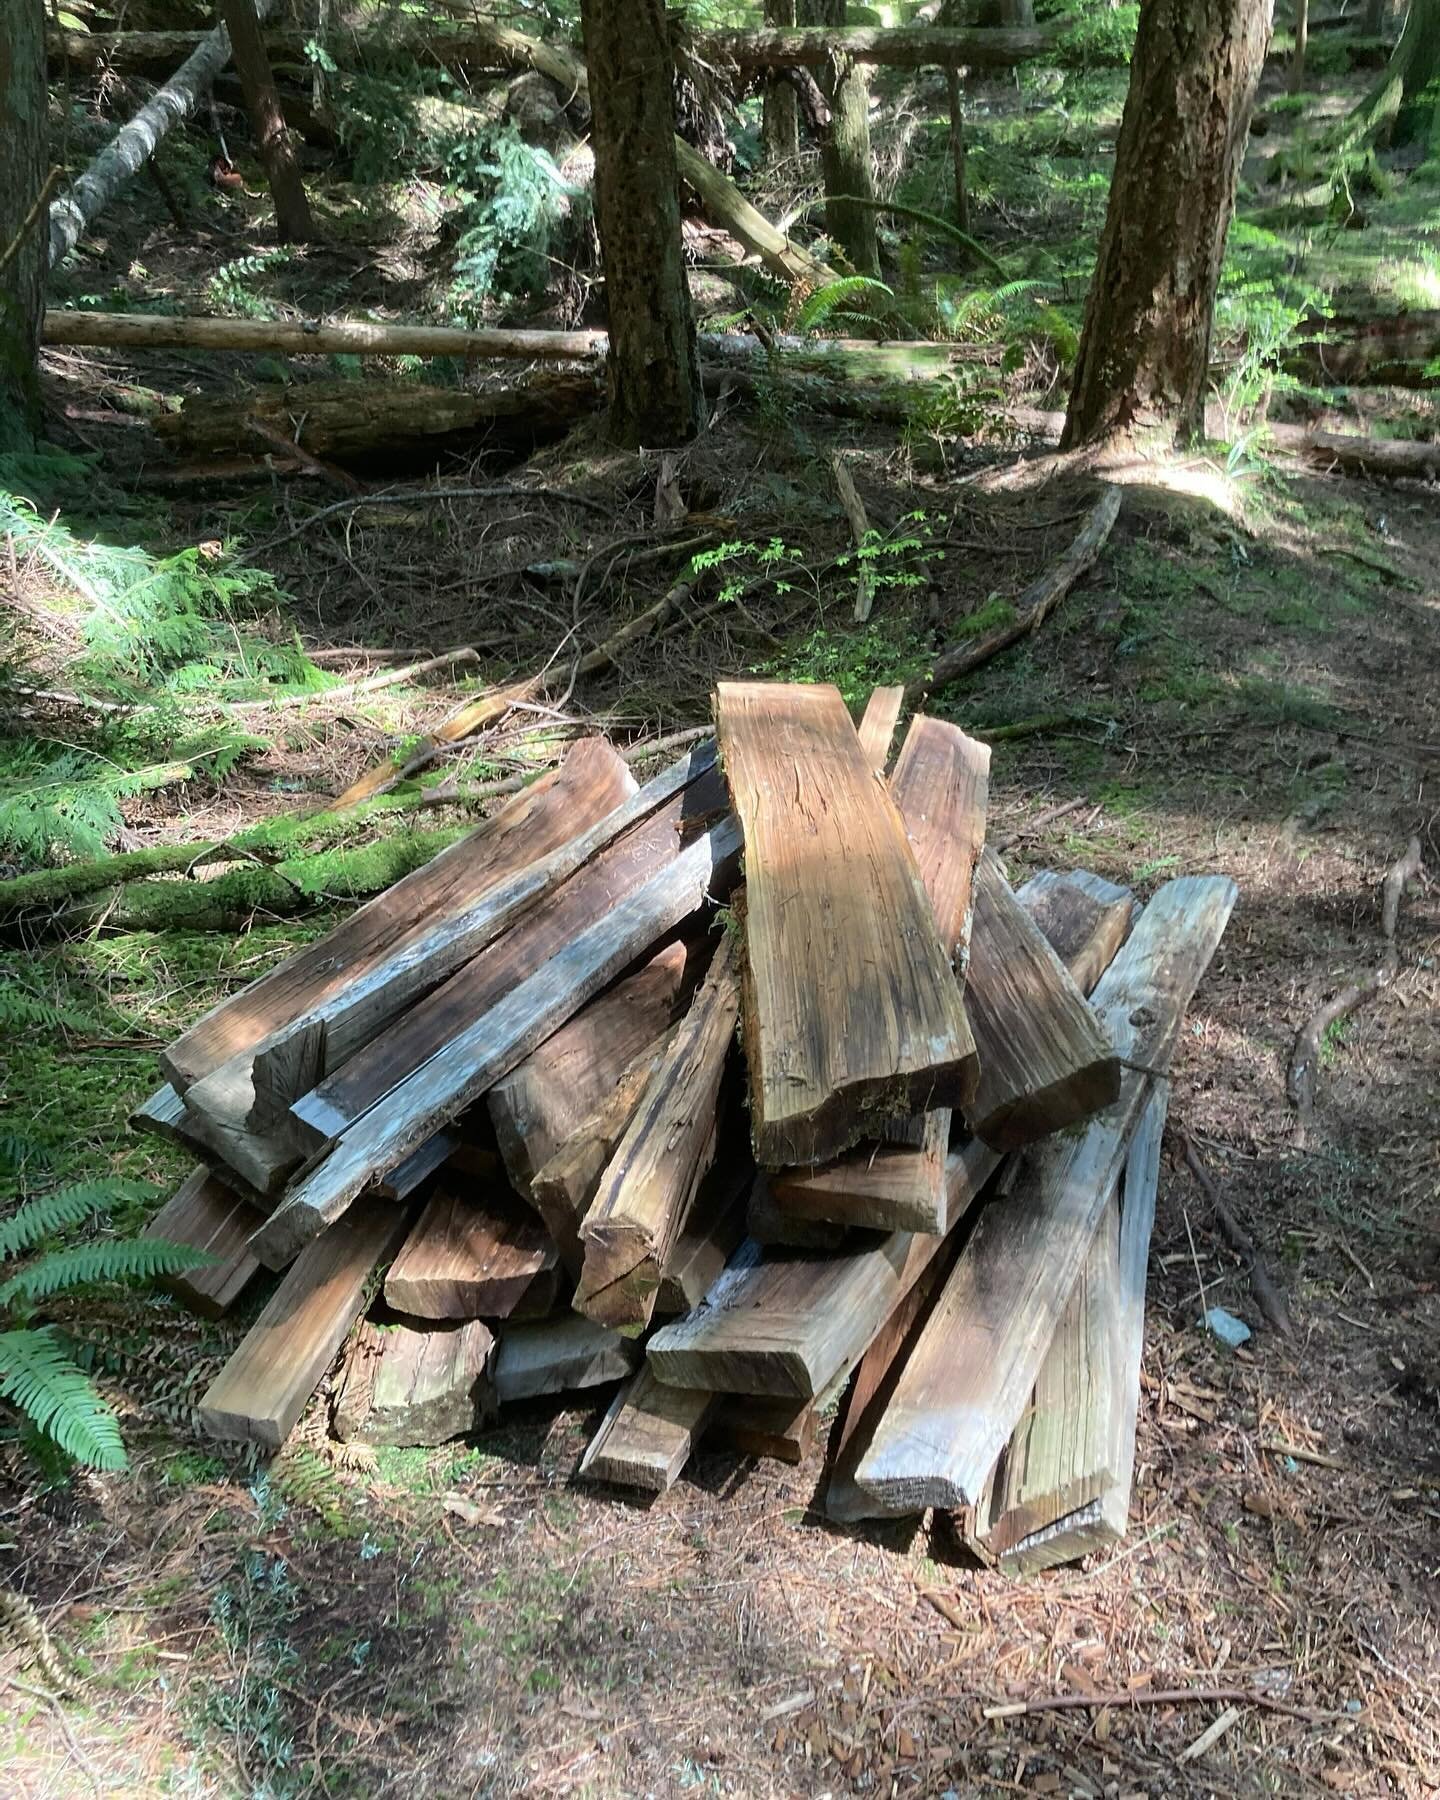 ⚠️Attention everyone!⚠️

The bridge on Addernach will be out until this Sunday for our trail day. Please use caution while navigating the area. Also, we&rsquo;ve prepped materials and left them on the trail. We kindly ask you not to move or take them